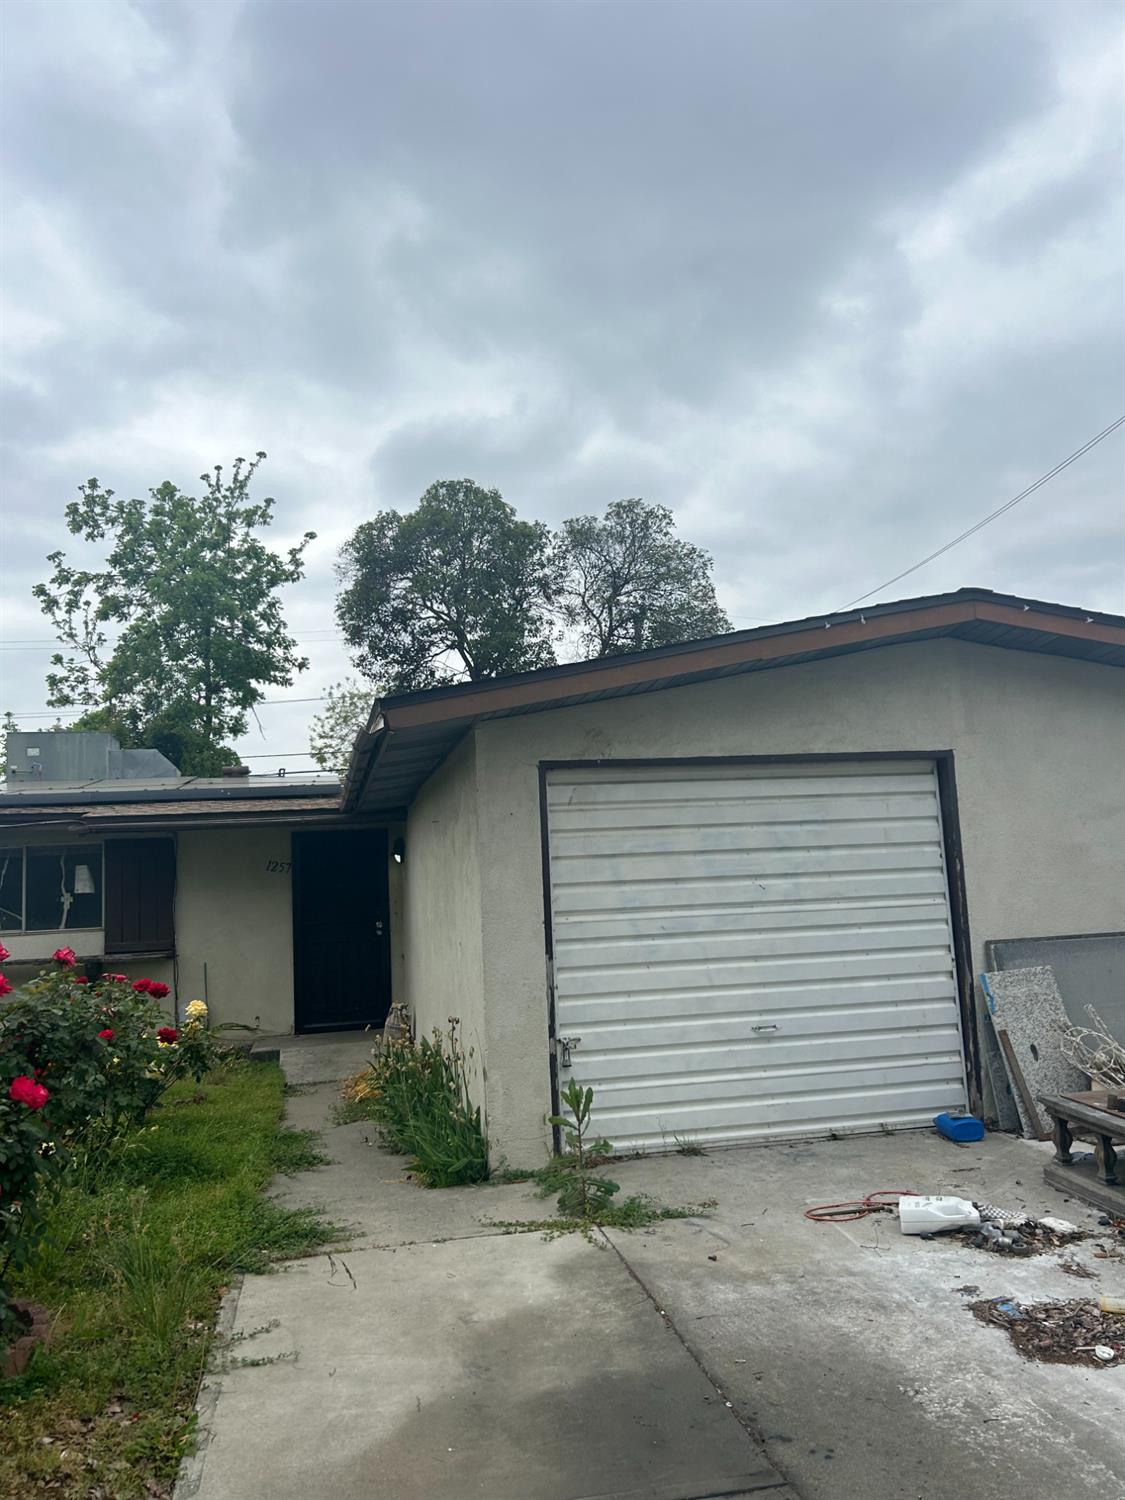 Photo of 1257 N Bailey Ave in Fresno, CA